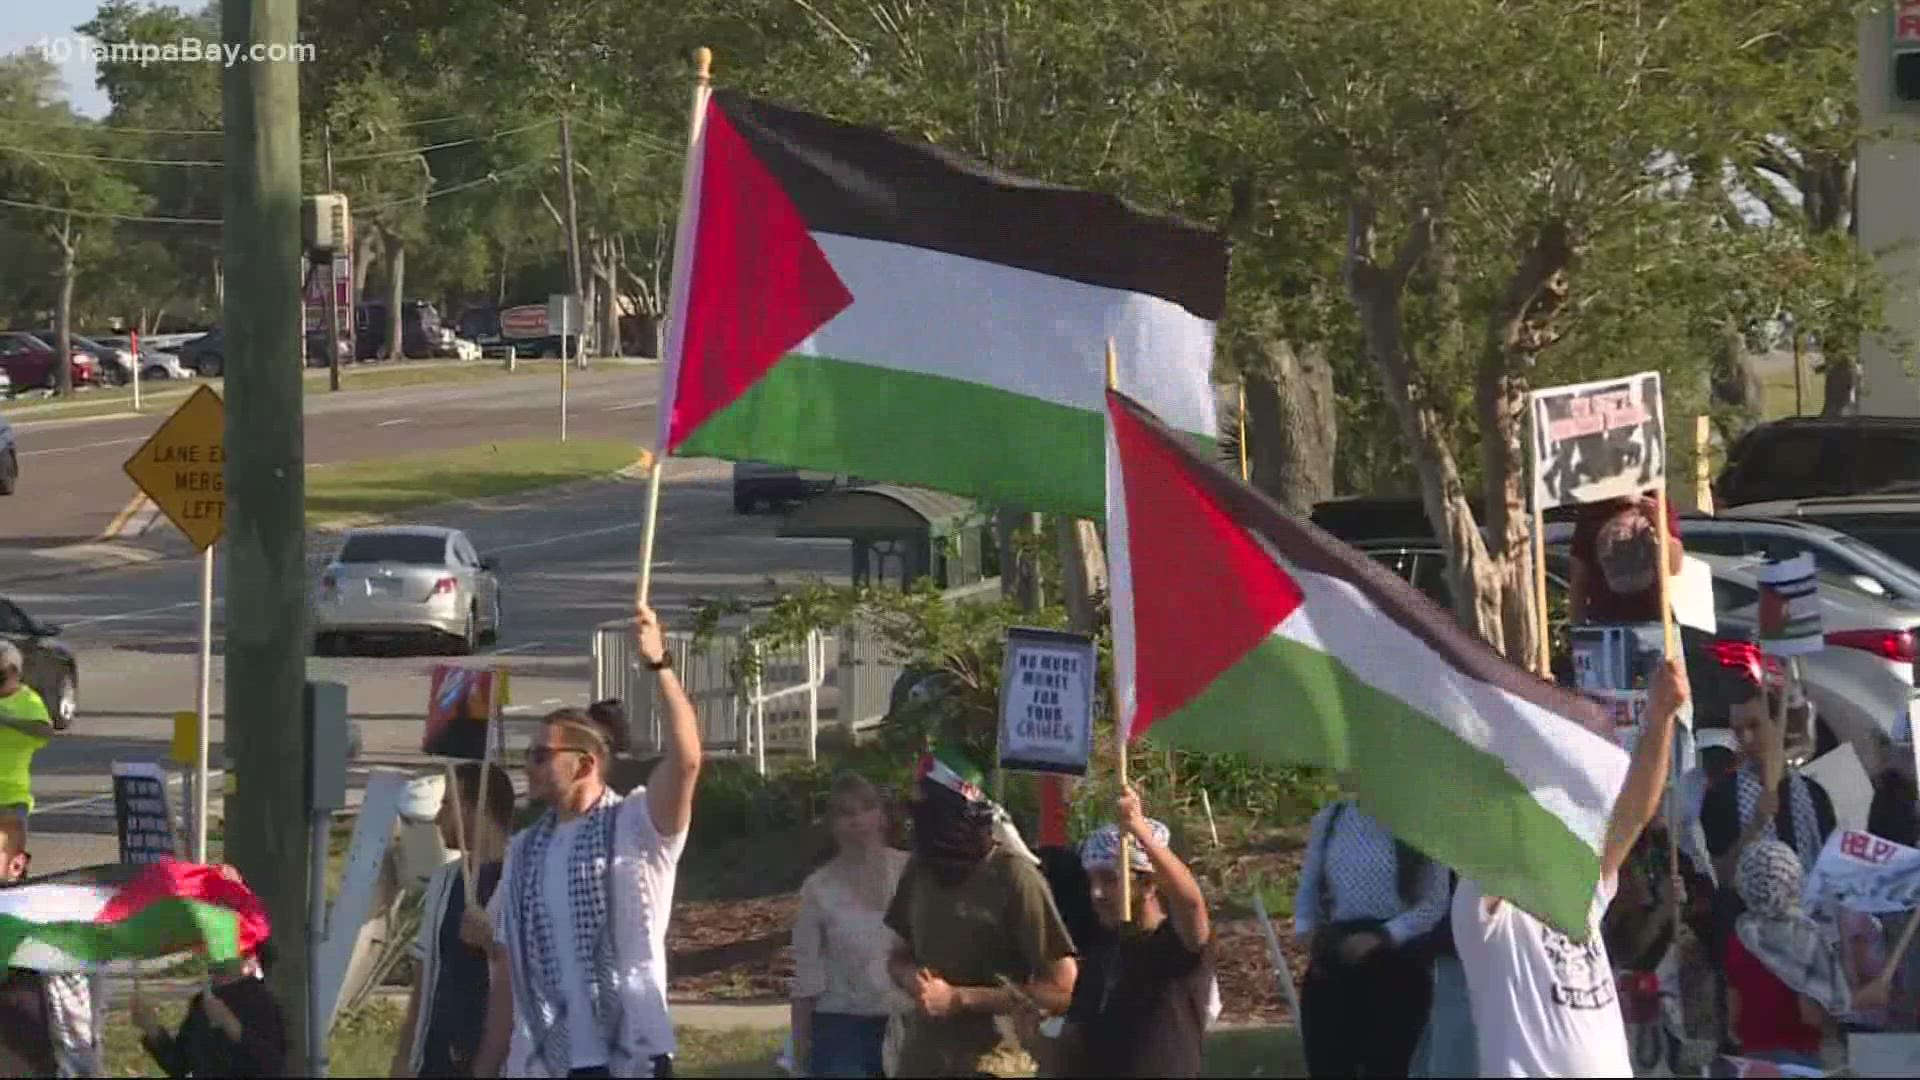 Supporters of Palestine say they are organizing to raise awareness of what's happening in the Middle East.